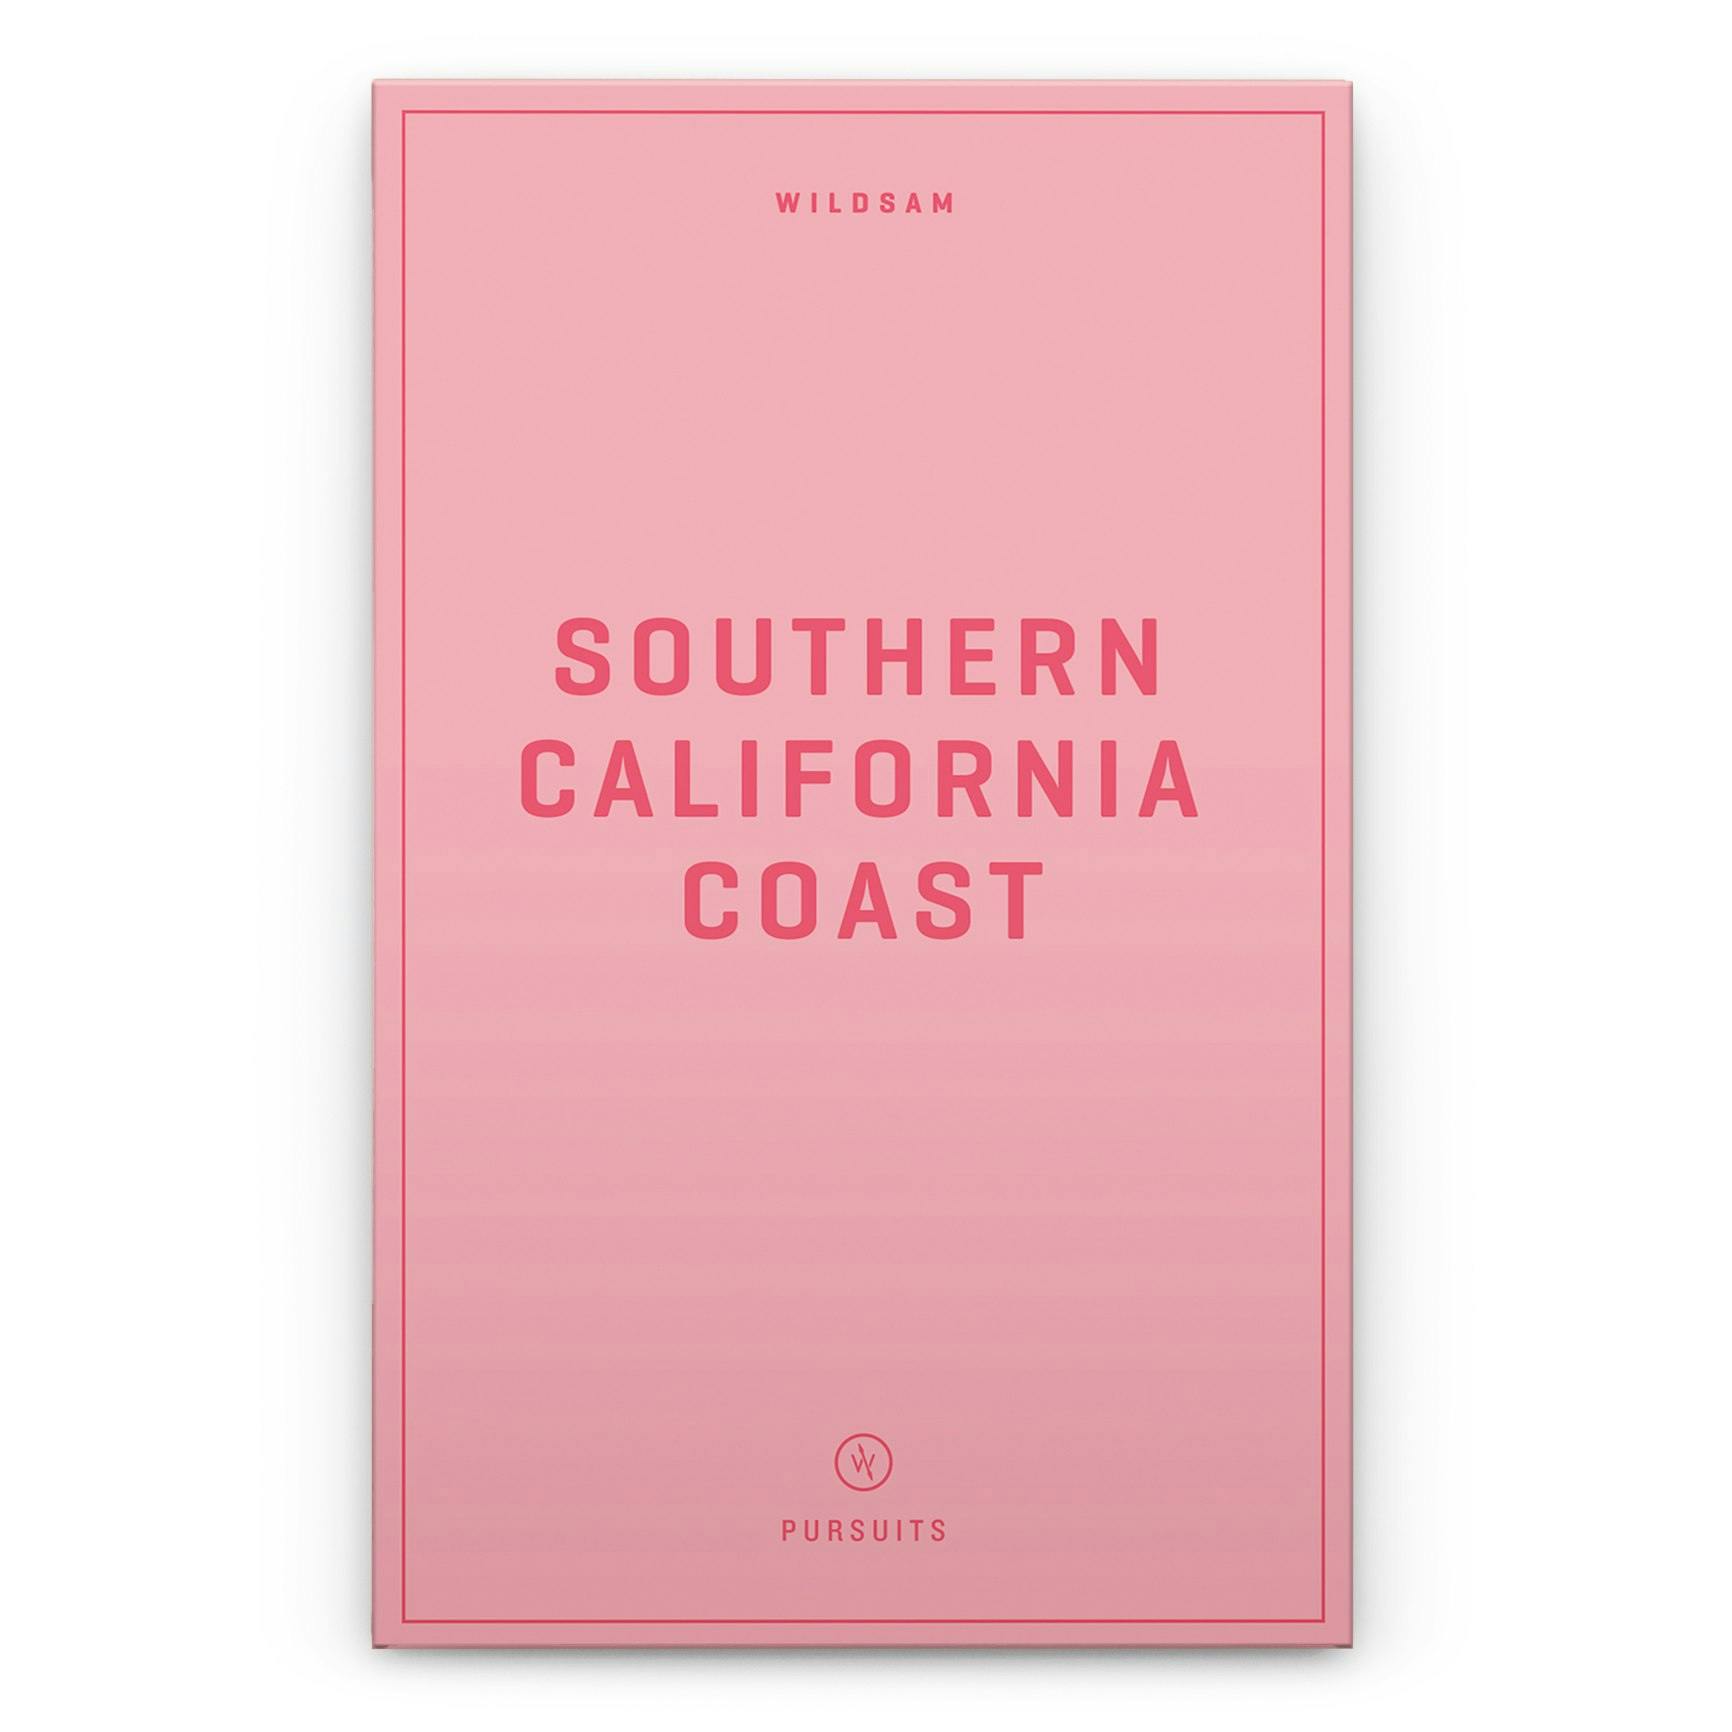 Southern California Coasts Field Guide